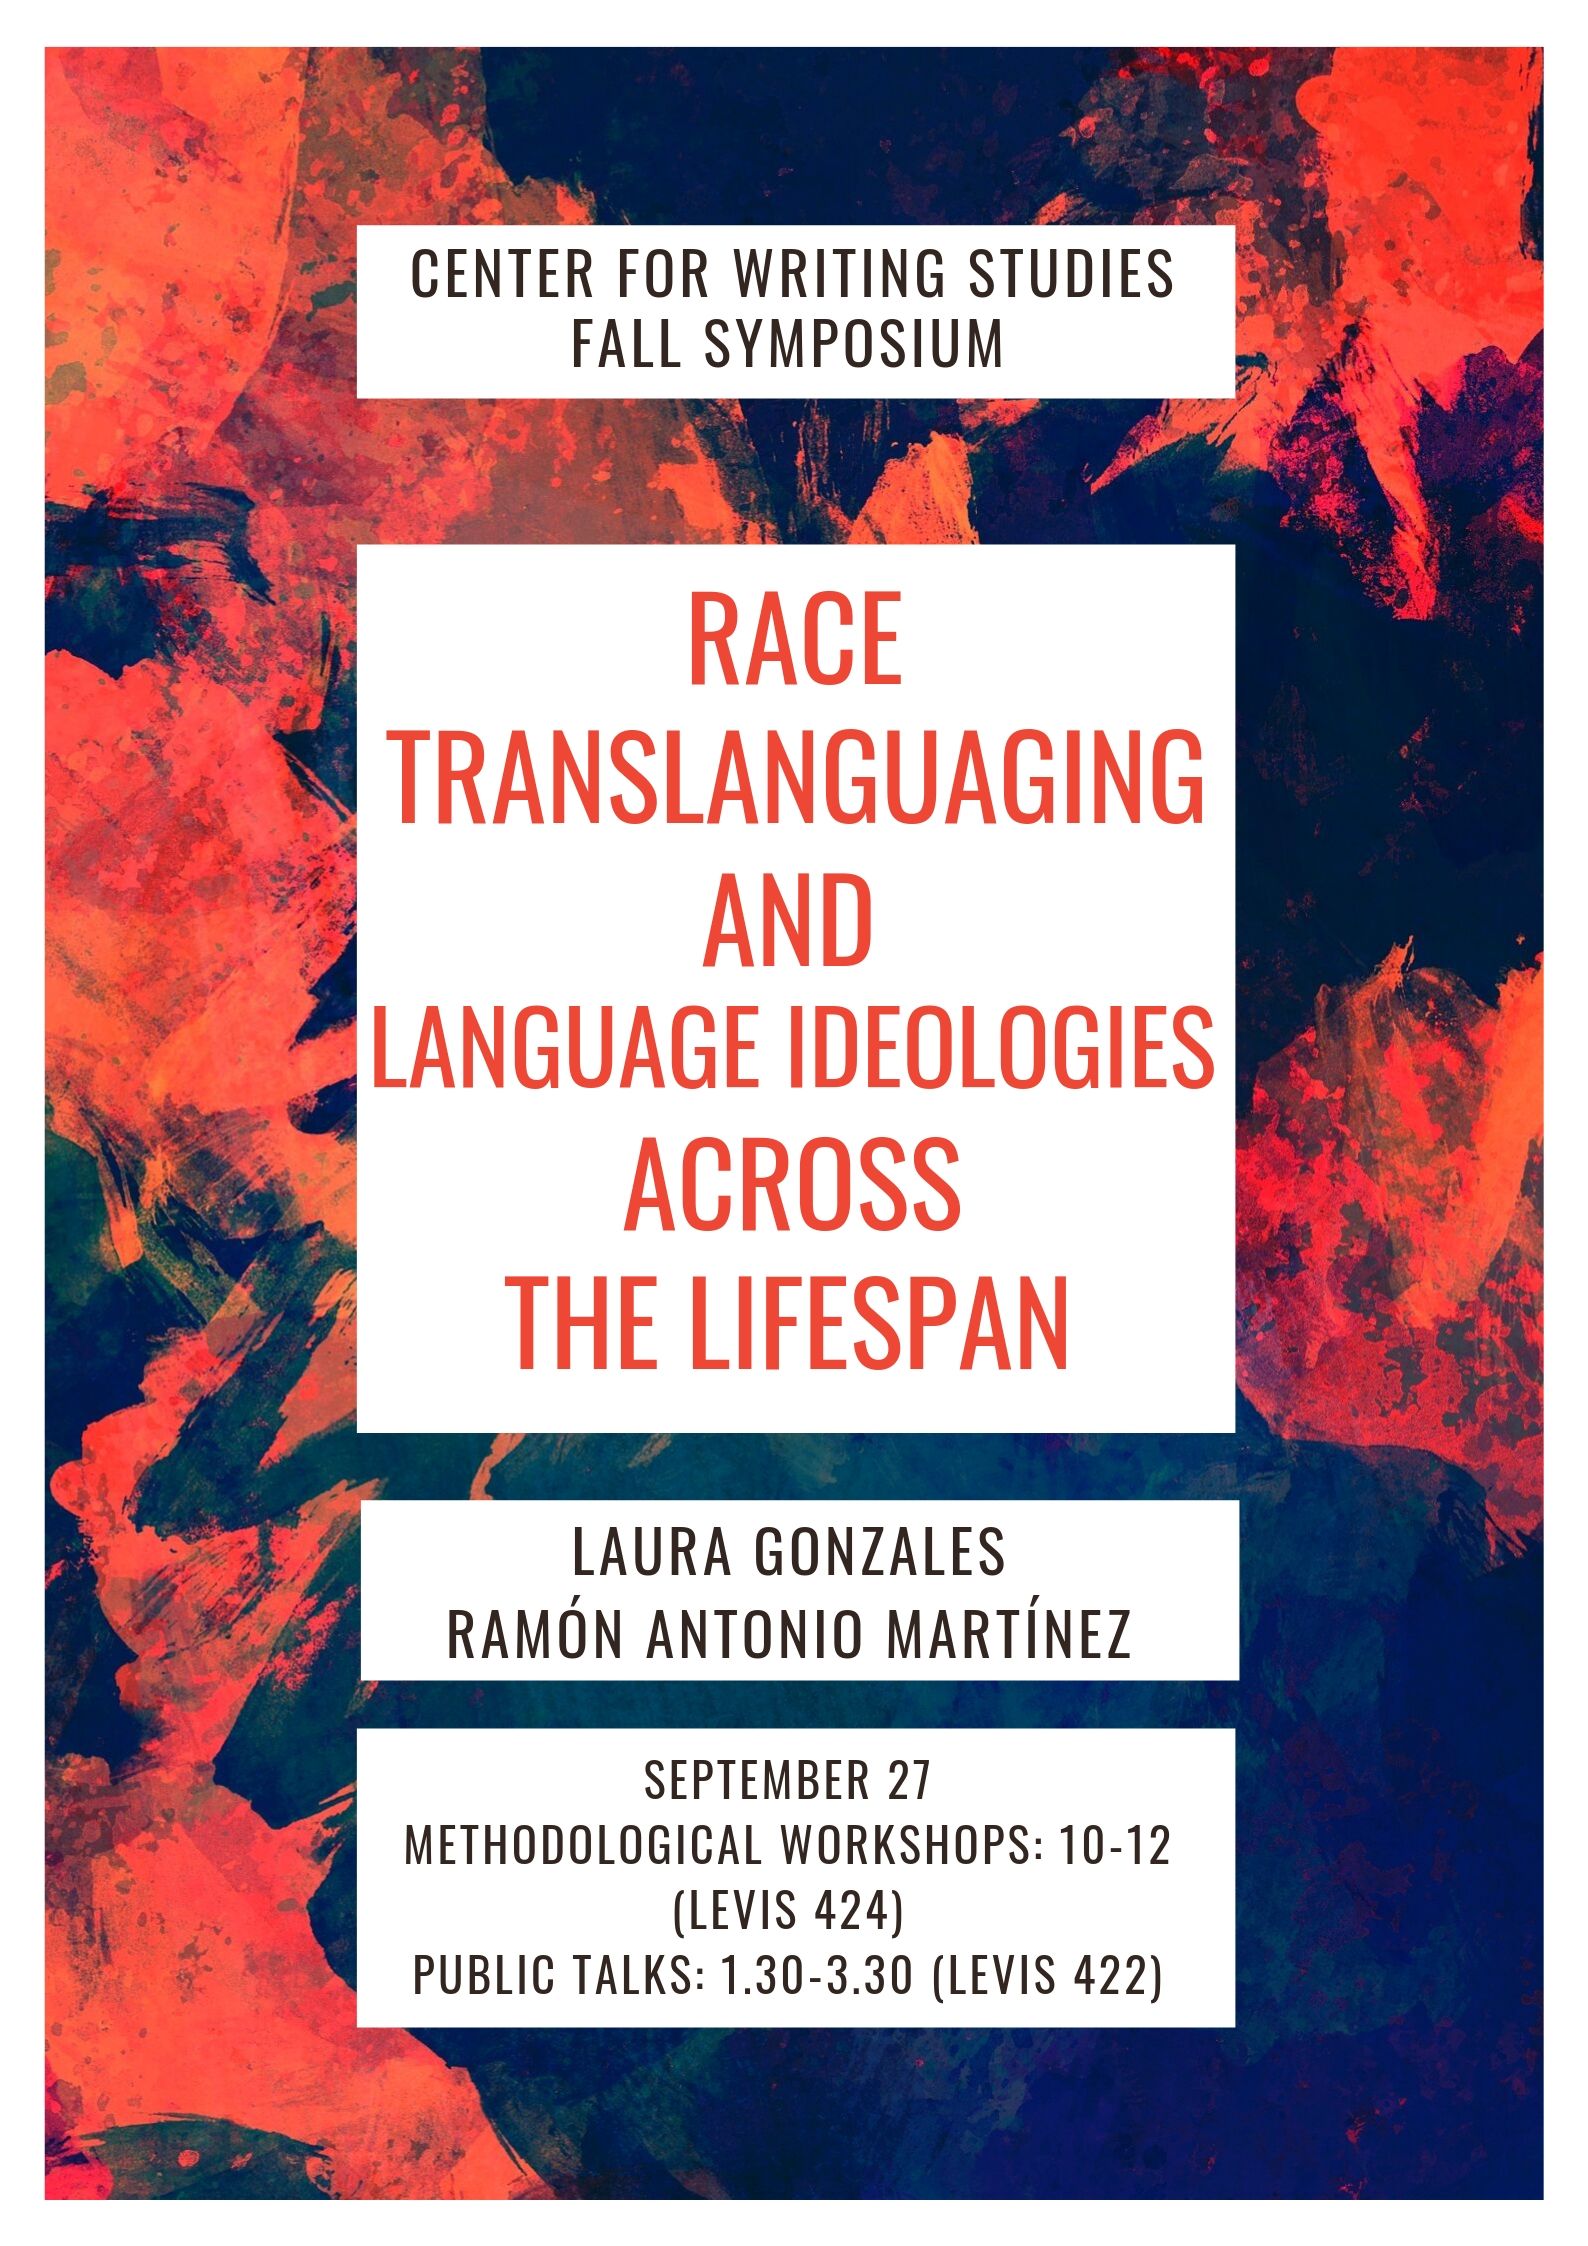 Event flyer with abstract orange and blue painted background. The text Center for Writing Studies Fall Symposium appears up top along with the name of the symposium below "Race, Translanguaging, and Language Ideologies Across the Lifespan" in bold orange text in the middle of the flyer. The names of the presenters, Laura Gonzales and Ramón Antonio Martínez, appear below the main title along with logistical details at the bottom of the flyer.